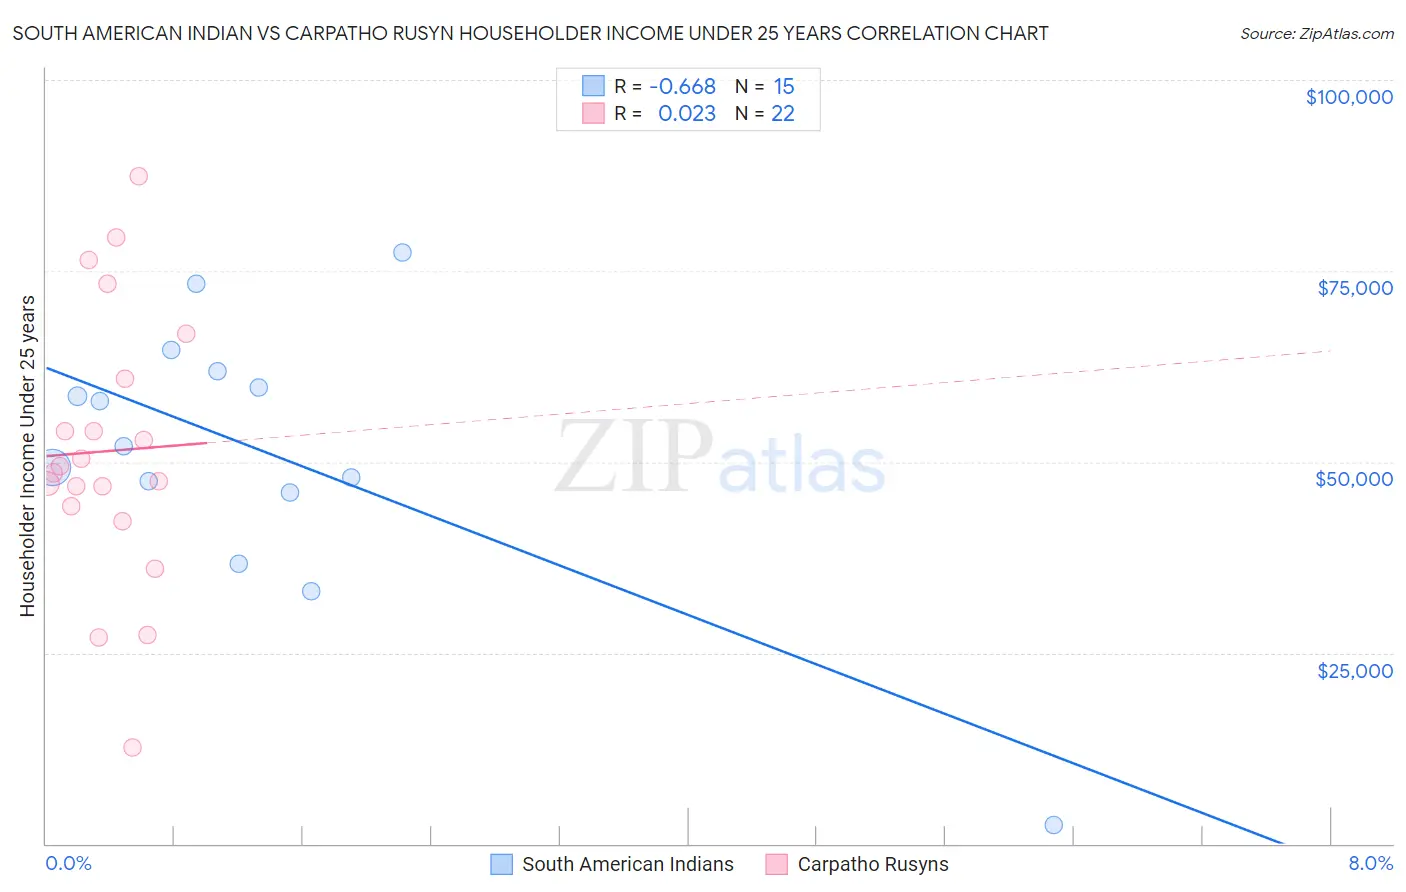 South American Indian vs Carpatho Rusyn Householder Income Under 25 years